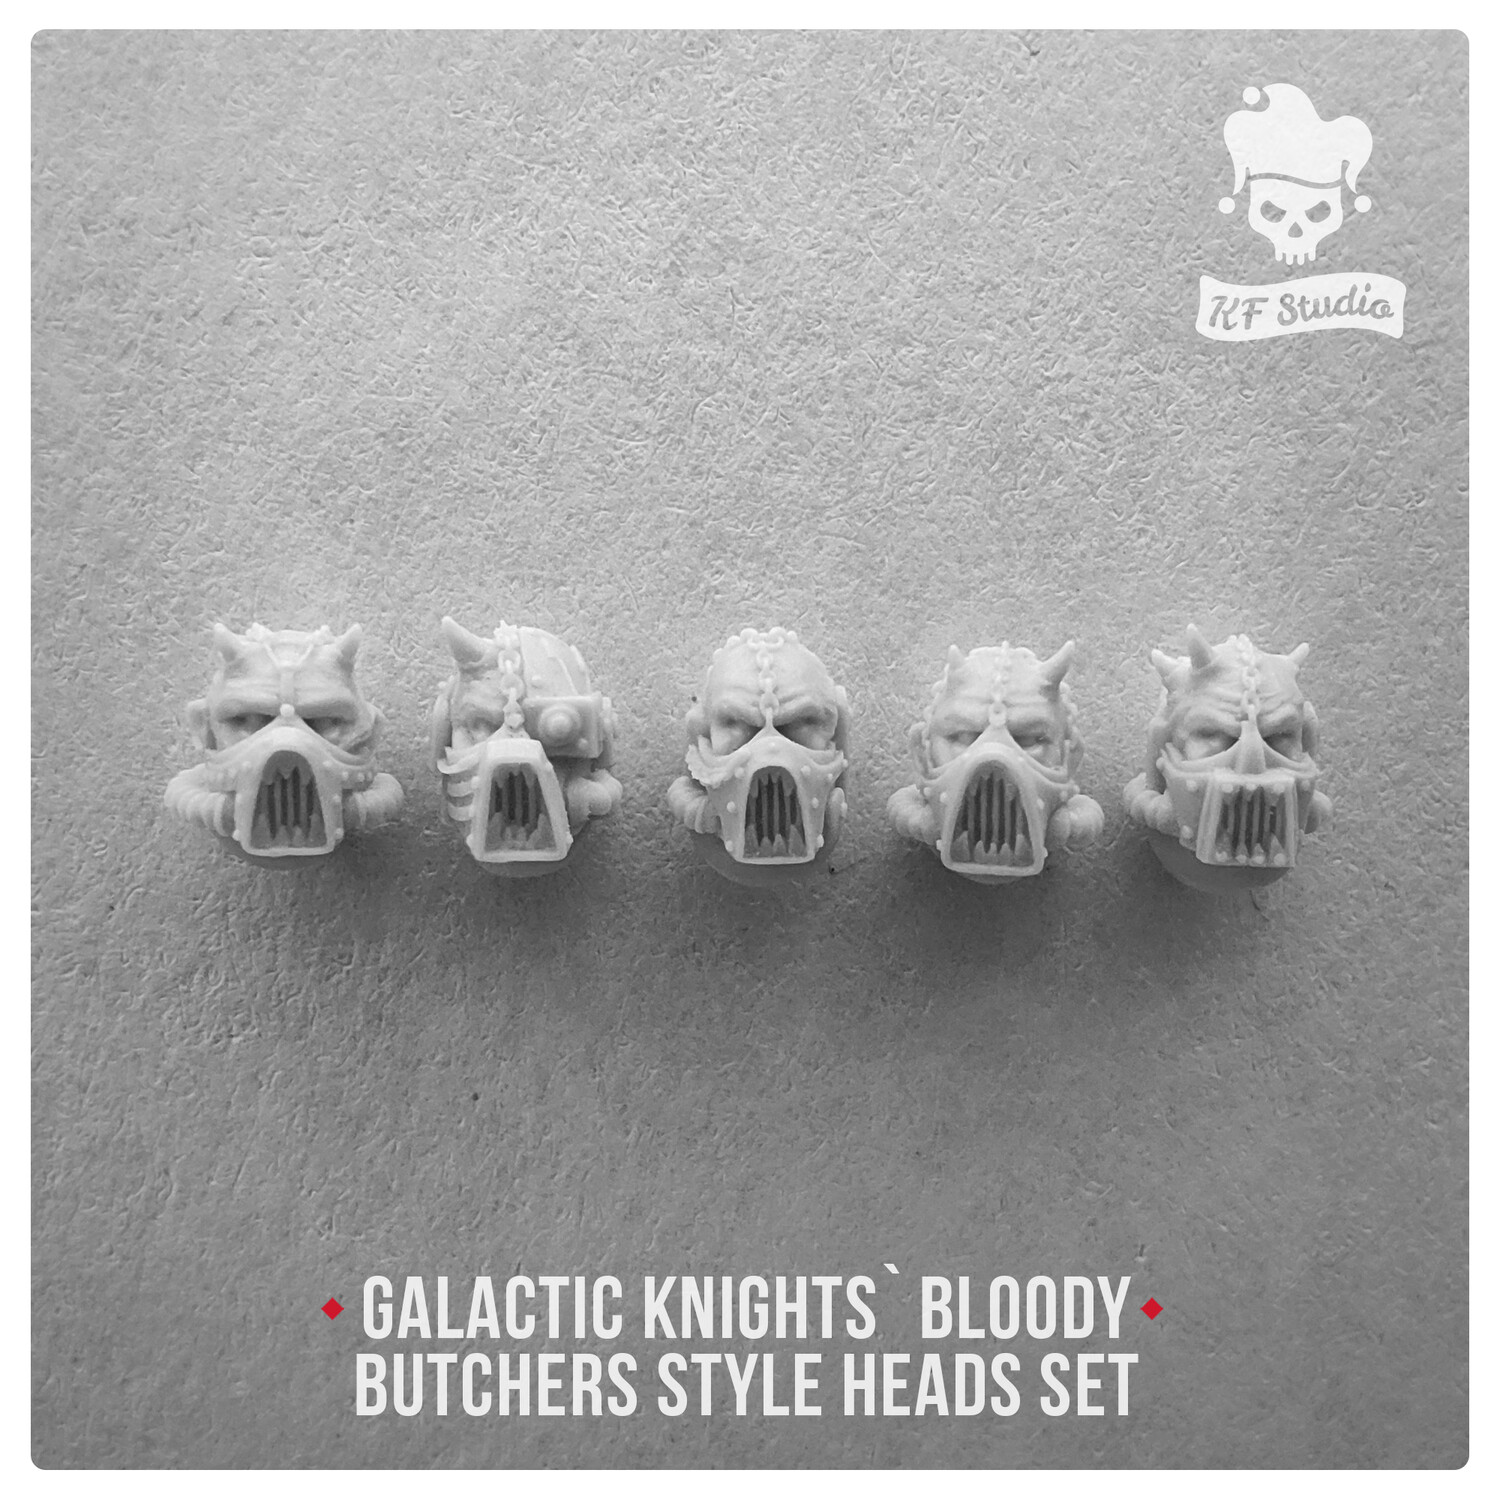 Galactic Knights Bloody Butcher Style Heads by  KFStudio